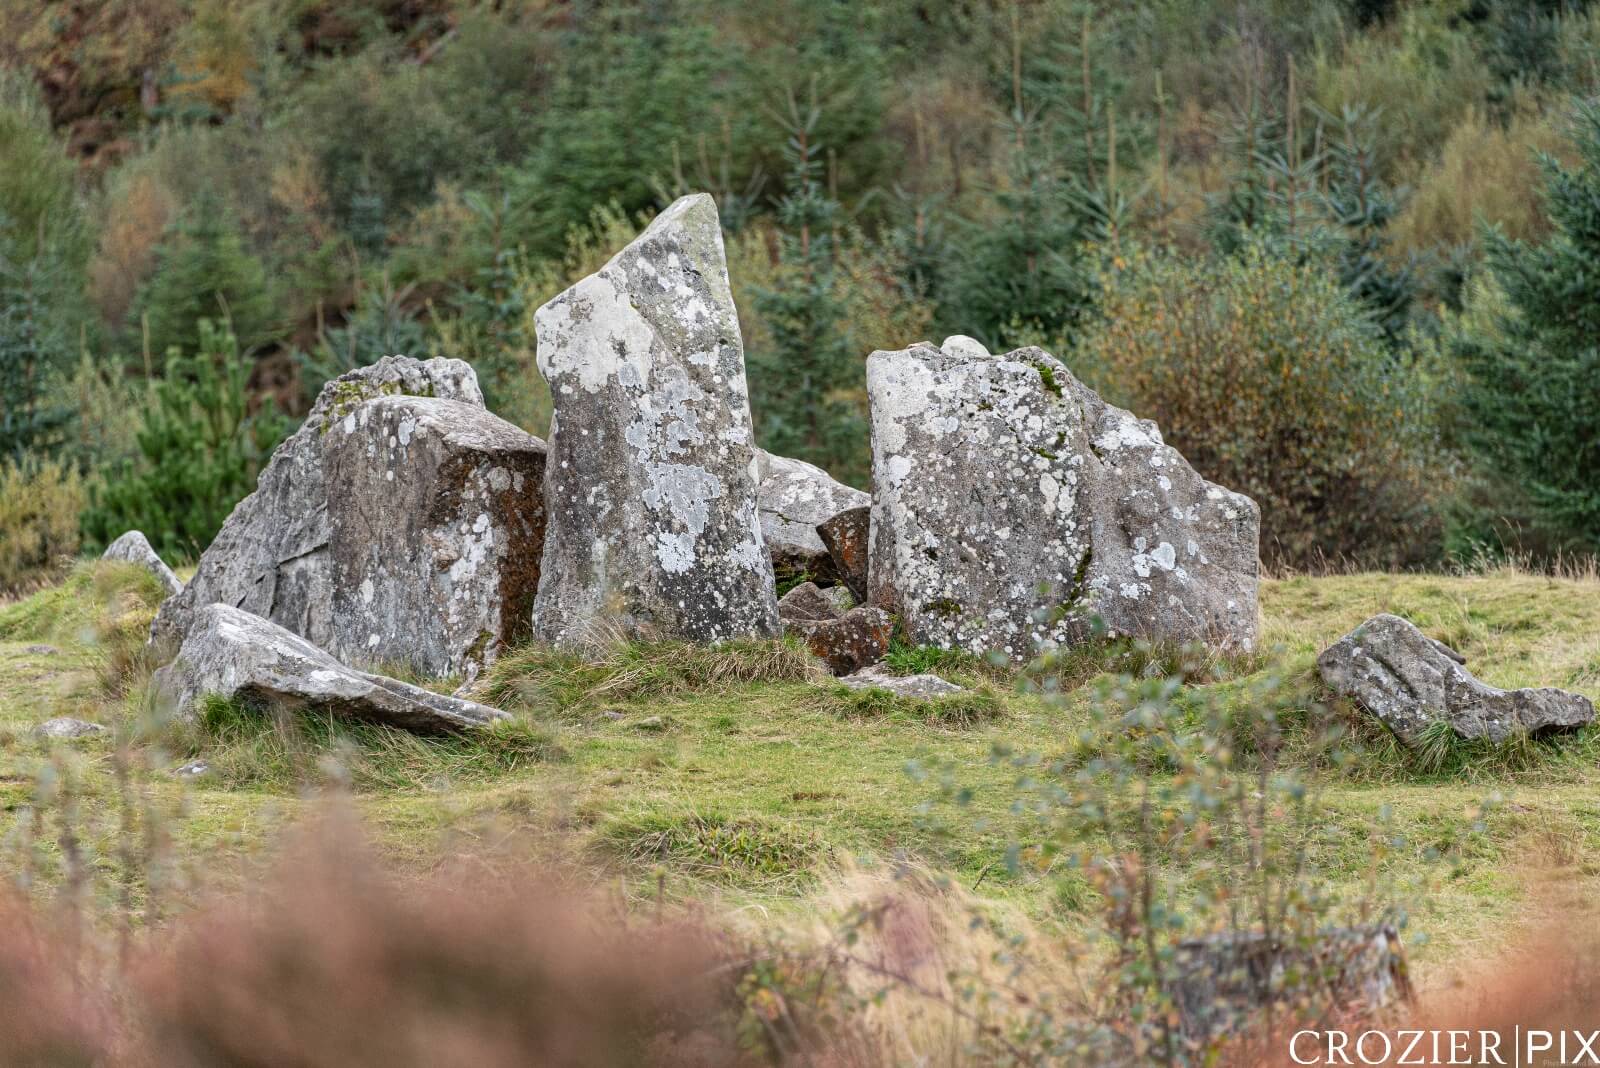 Image of Giants\' Graves by Alan Crozier